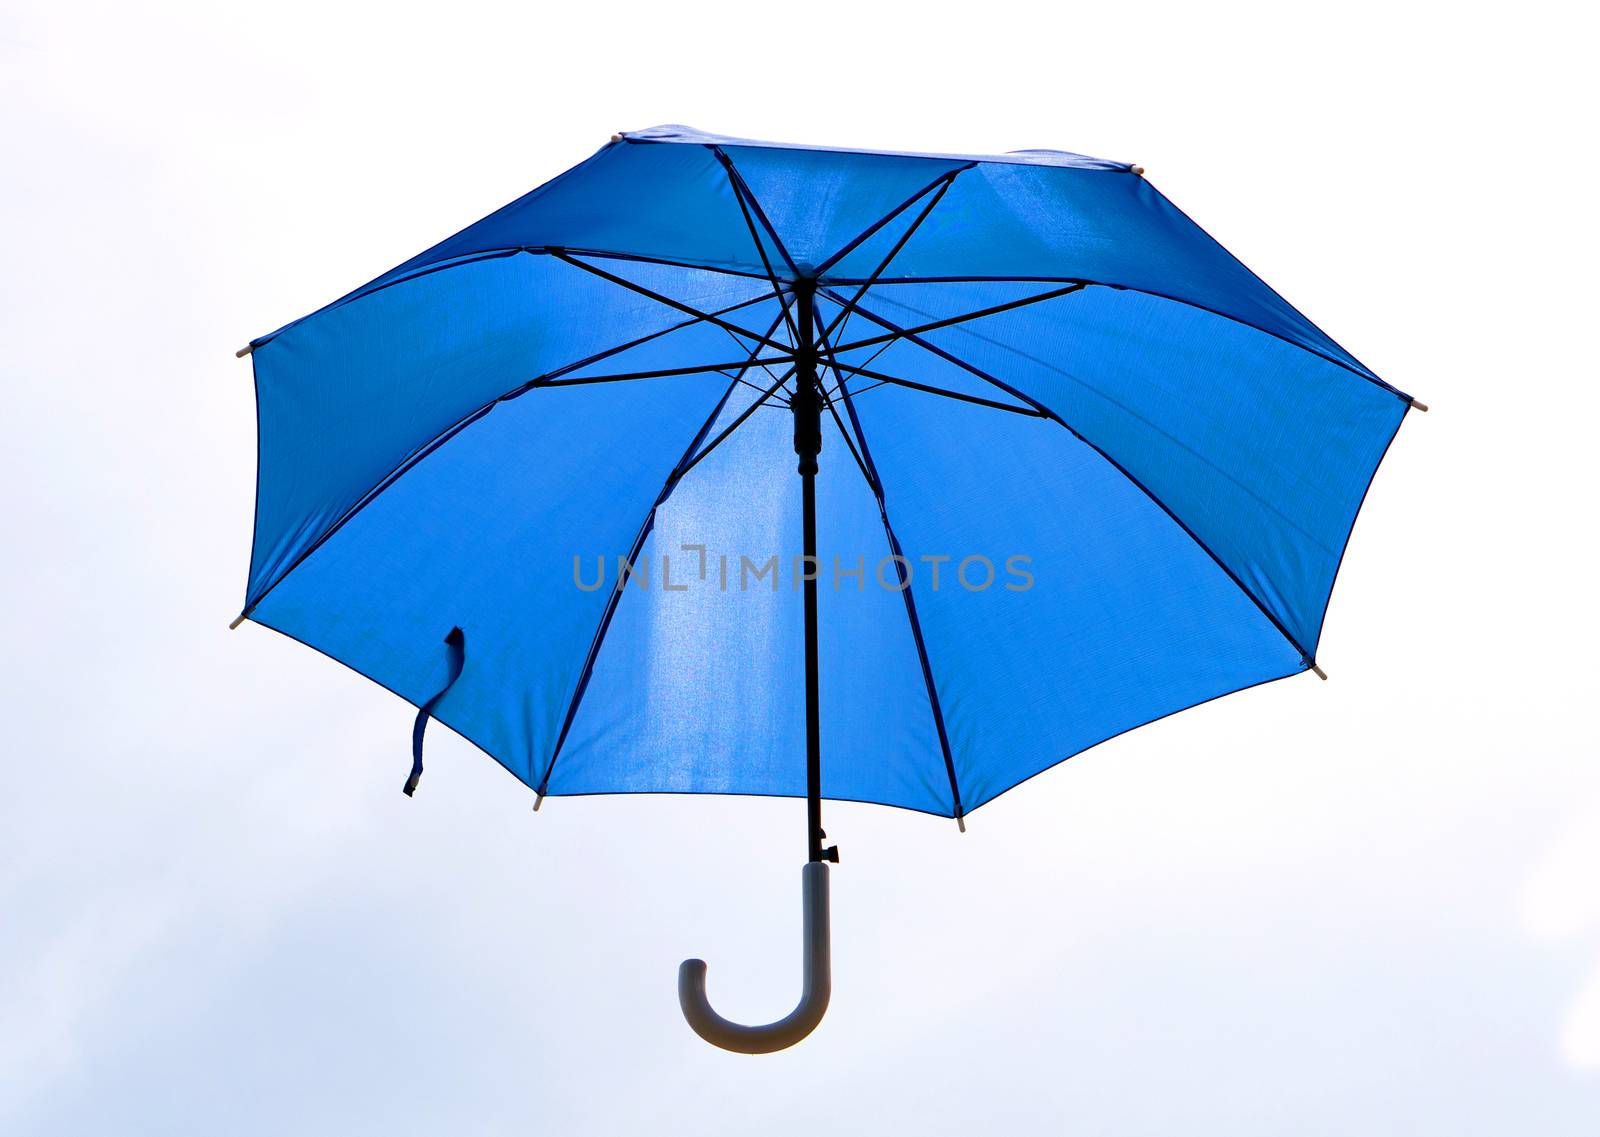 A blue umbrella that was unfolded isolated on white background.